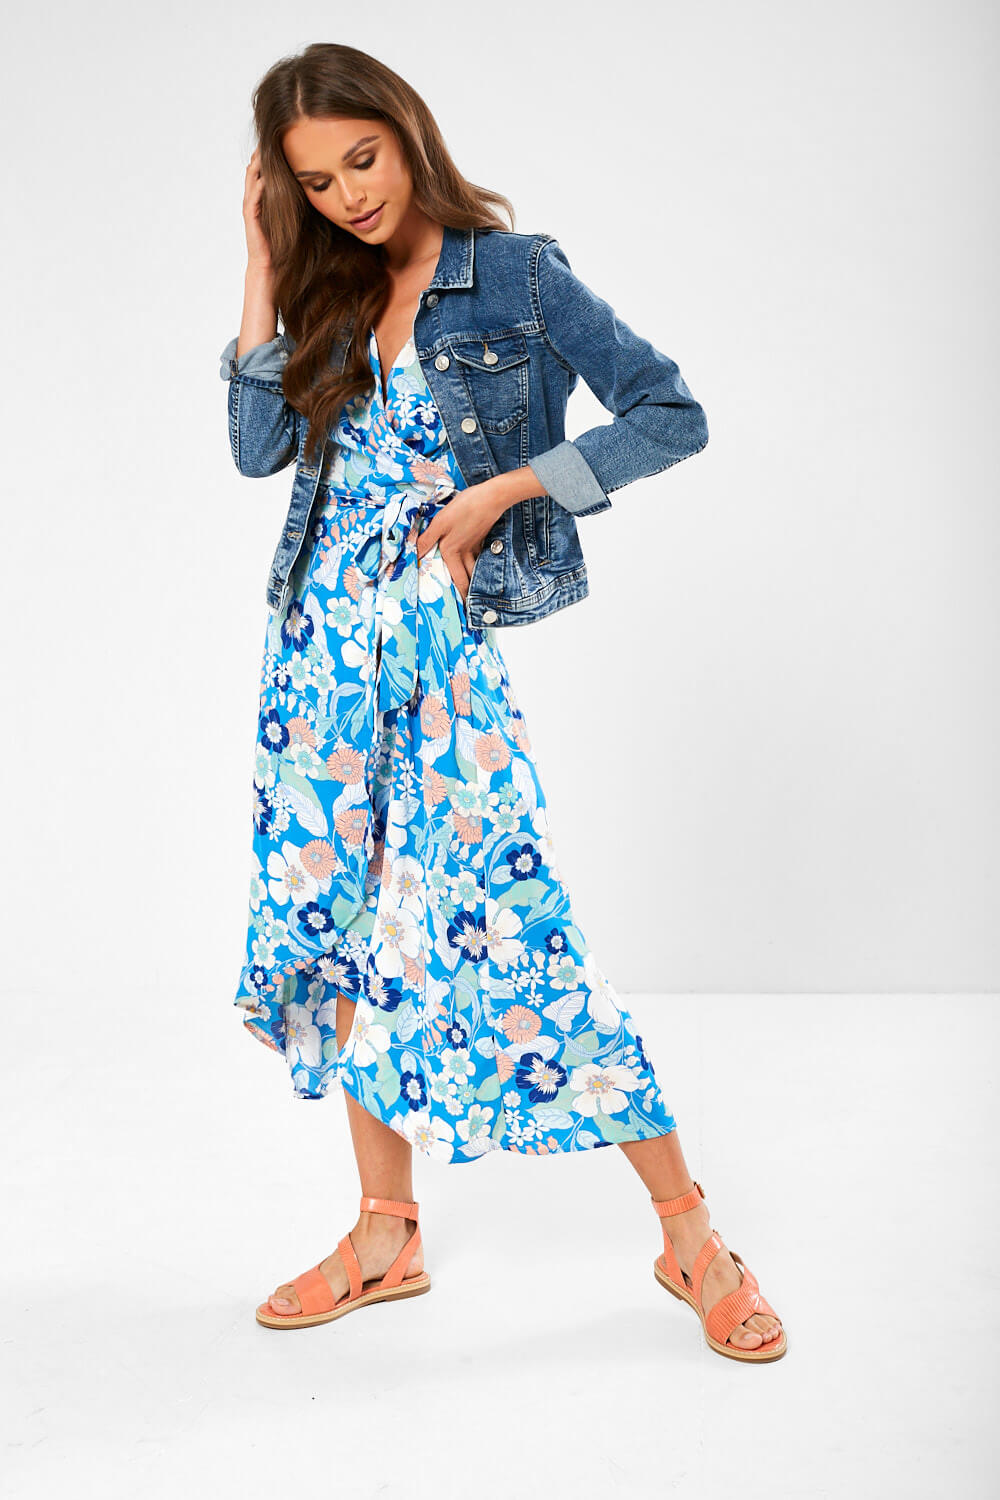 Marc Angelo Floral Midi Wrap Dress in Blue | iCLOTHING - iCLOTHING